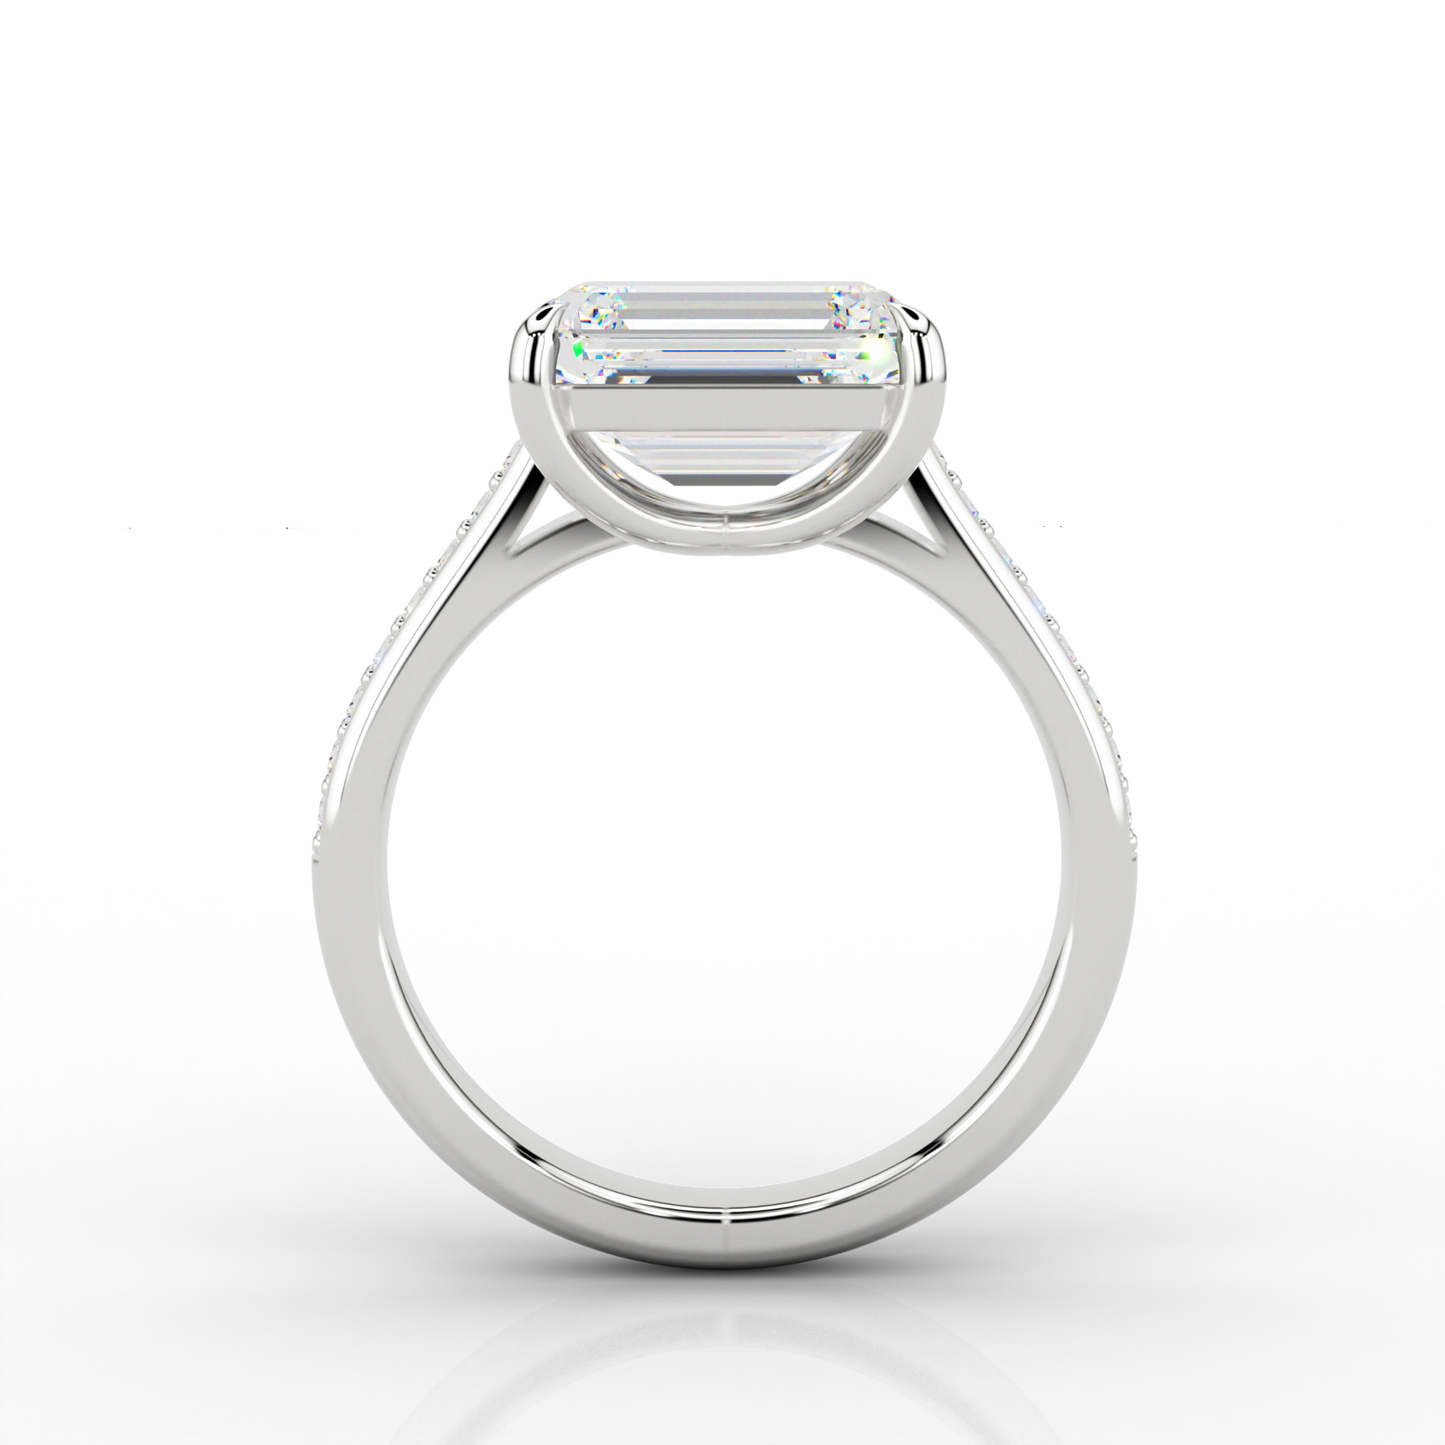 Large Emerald Cut 3.67ct Diamond Engagement Ring in Recycled Platinum